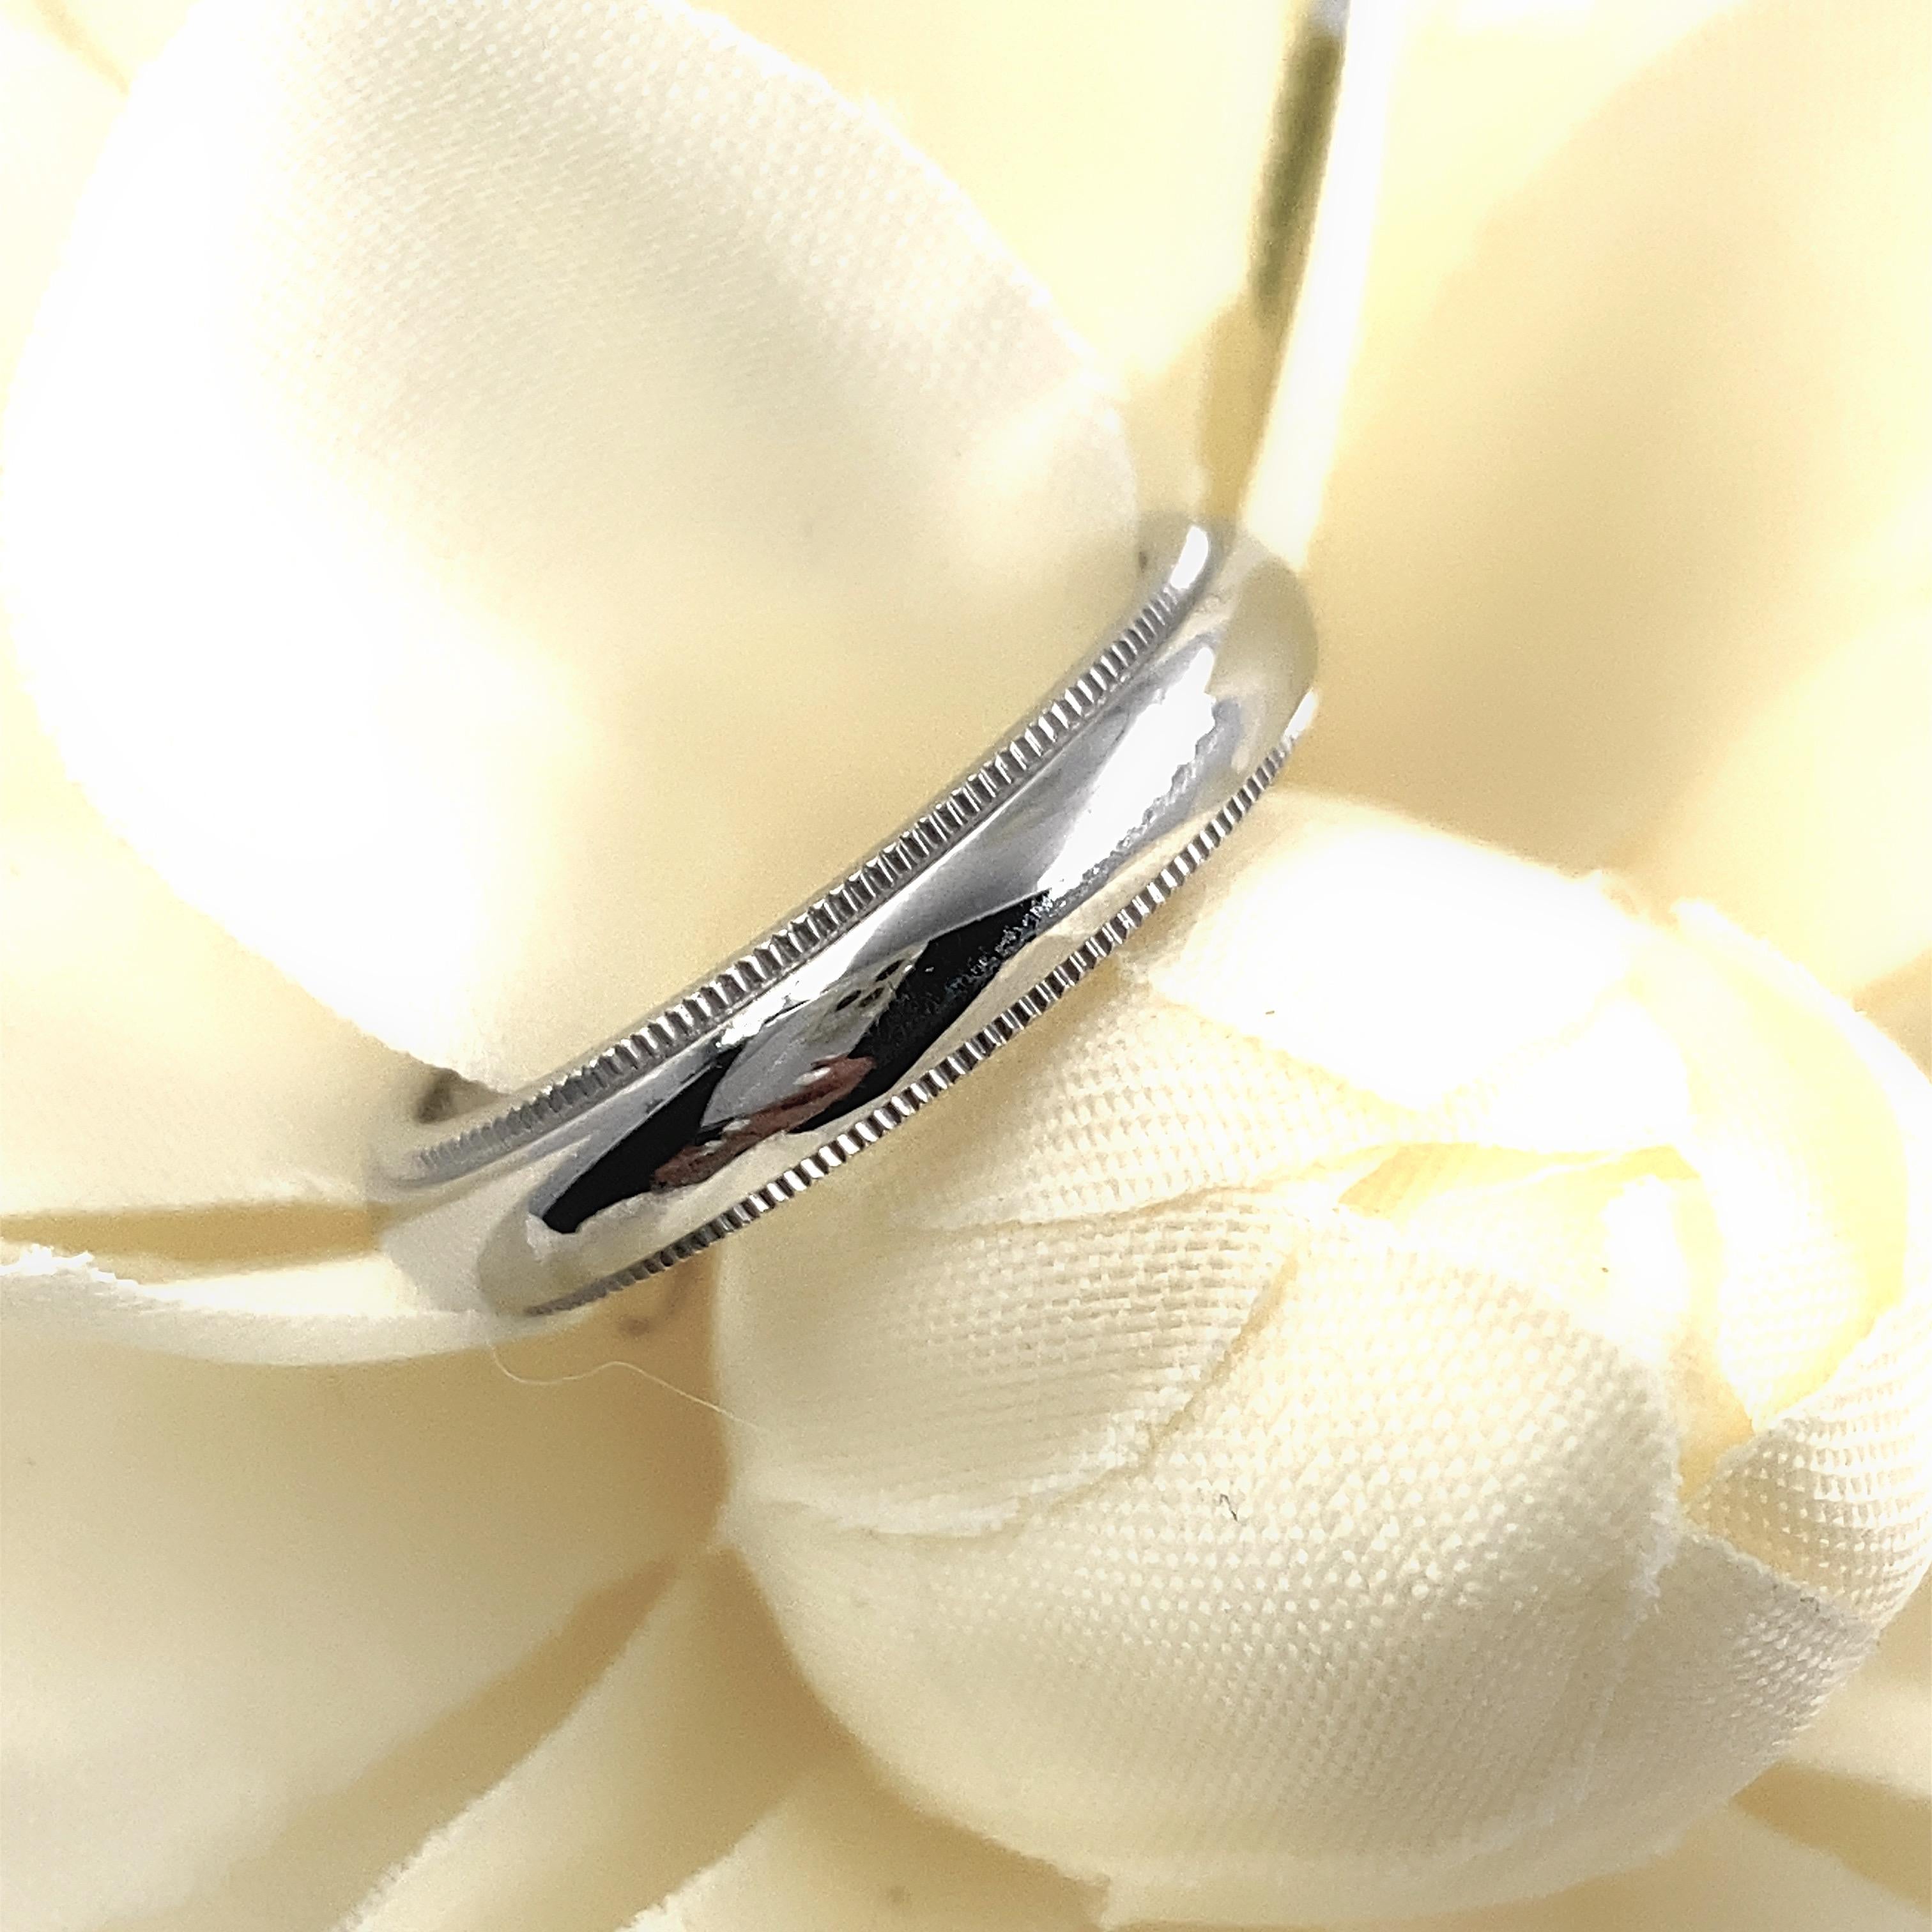 Tiffany & Co. Classic Milgrain Wedding Band Ring Platinum In Excellent Condition For Sale In San Diego, CA